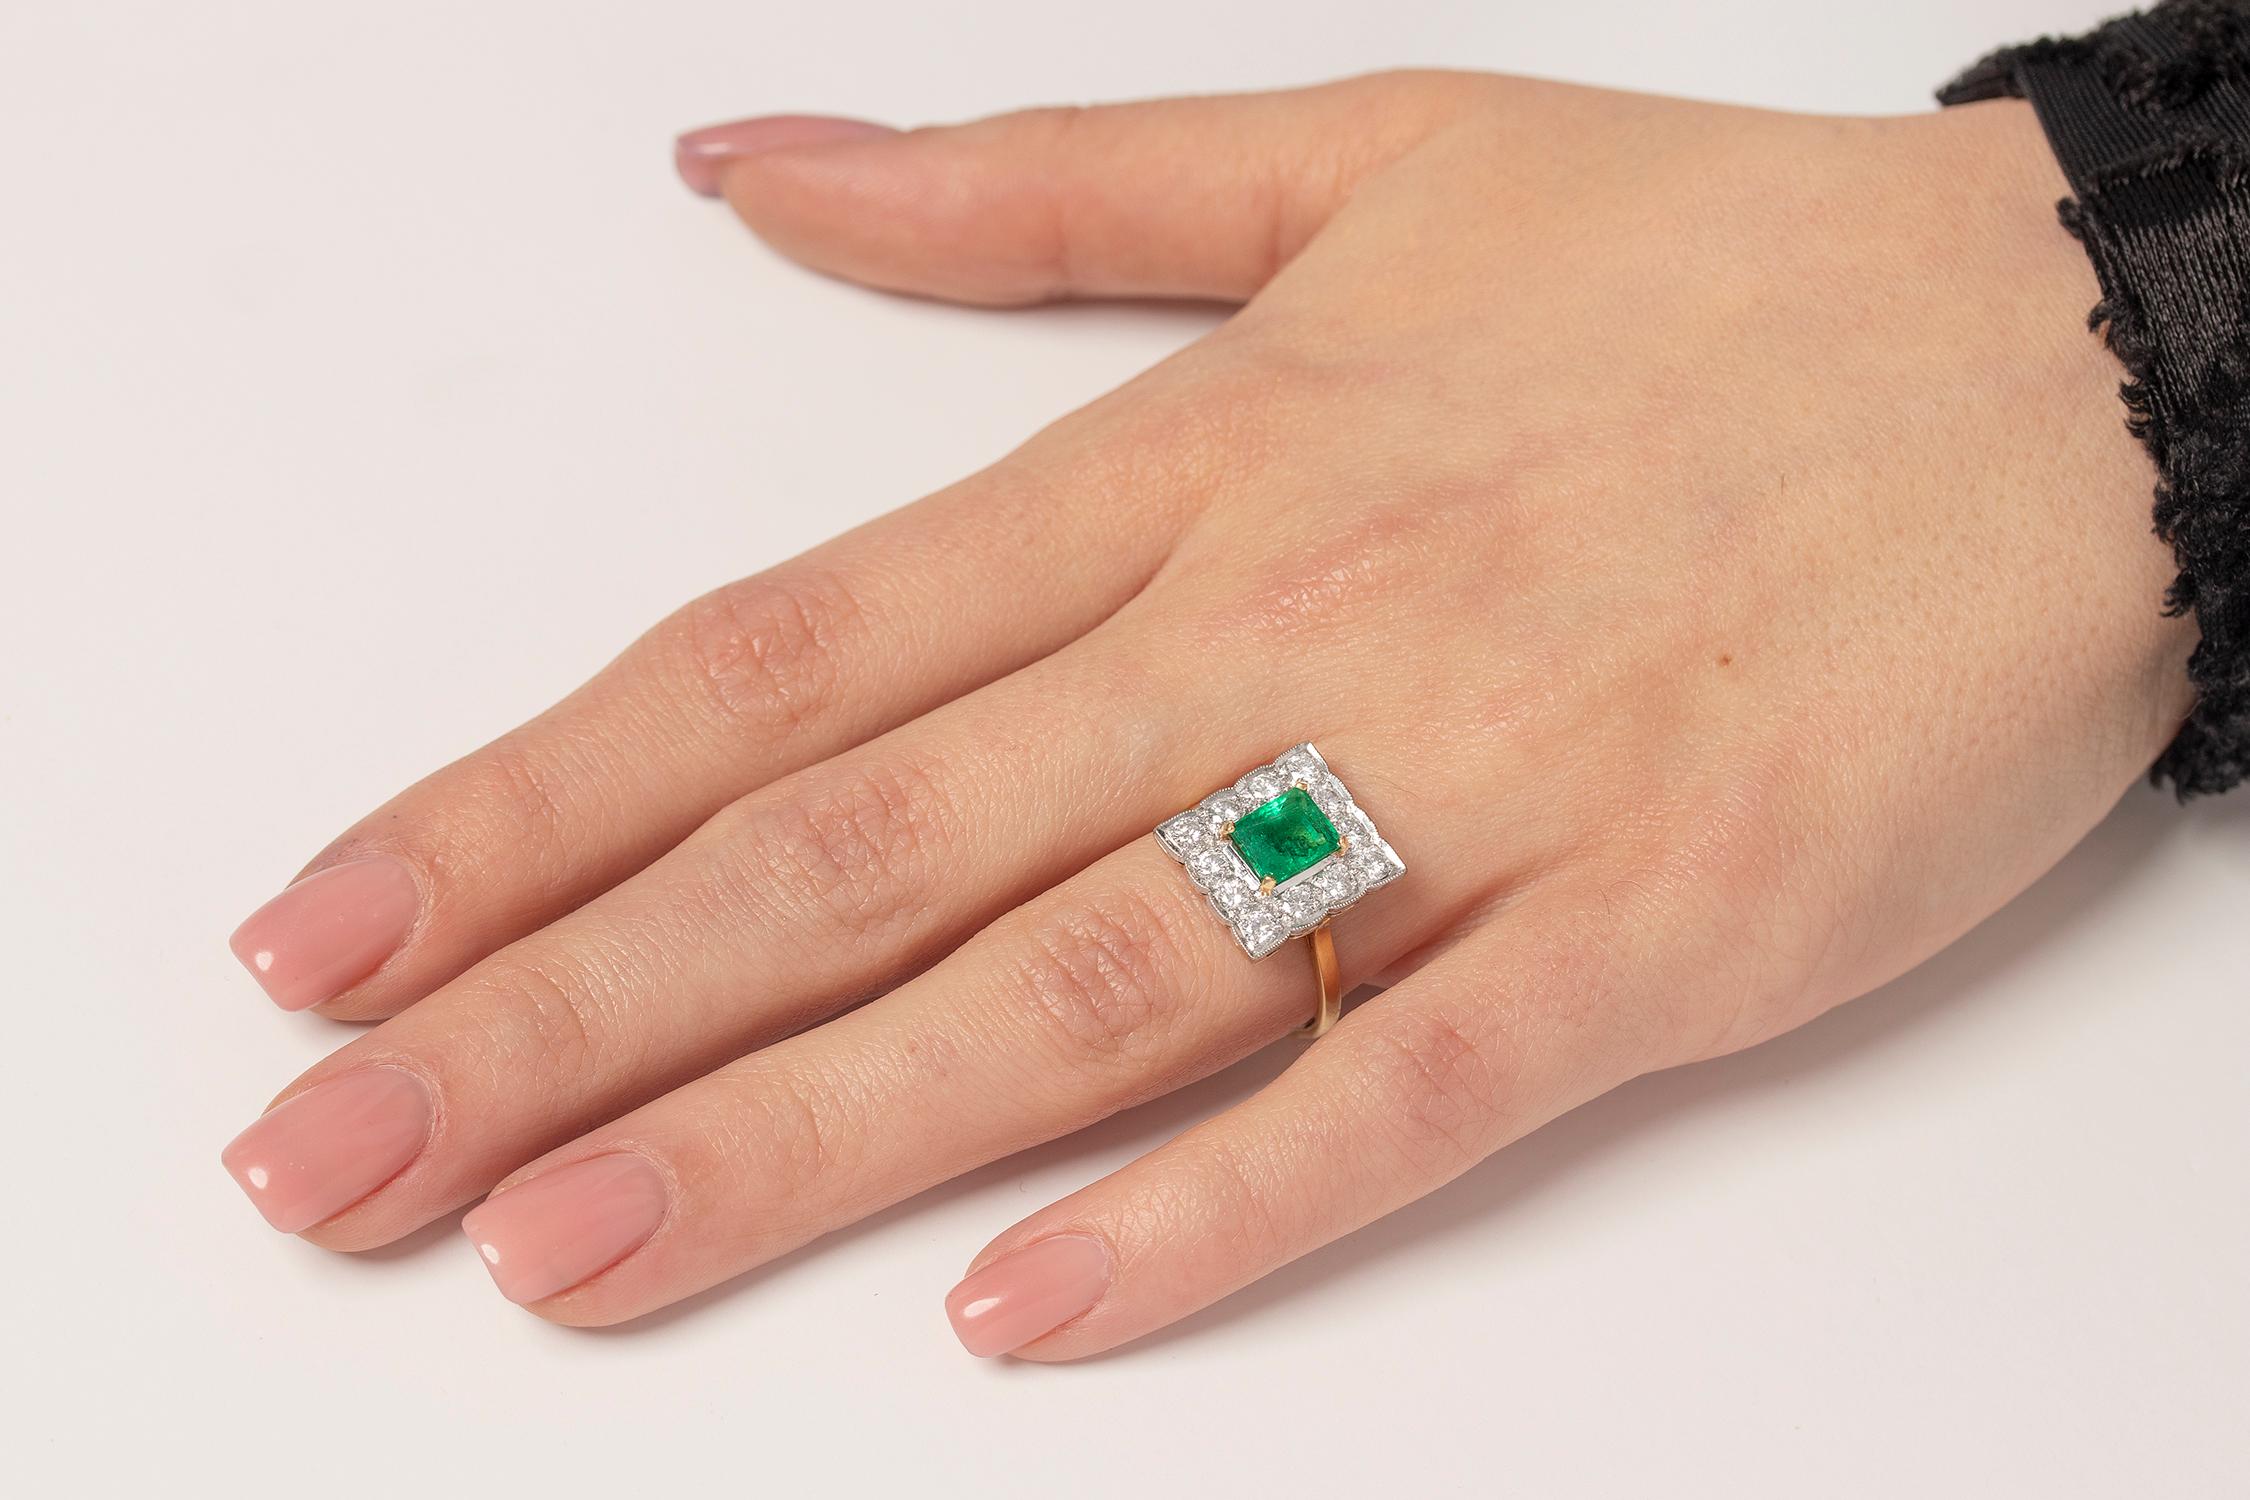 Vintage 1.20 Carat Emerald and Diamond Cocktail Ring, circa 1980s For Sale 1